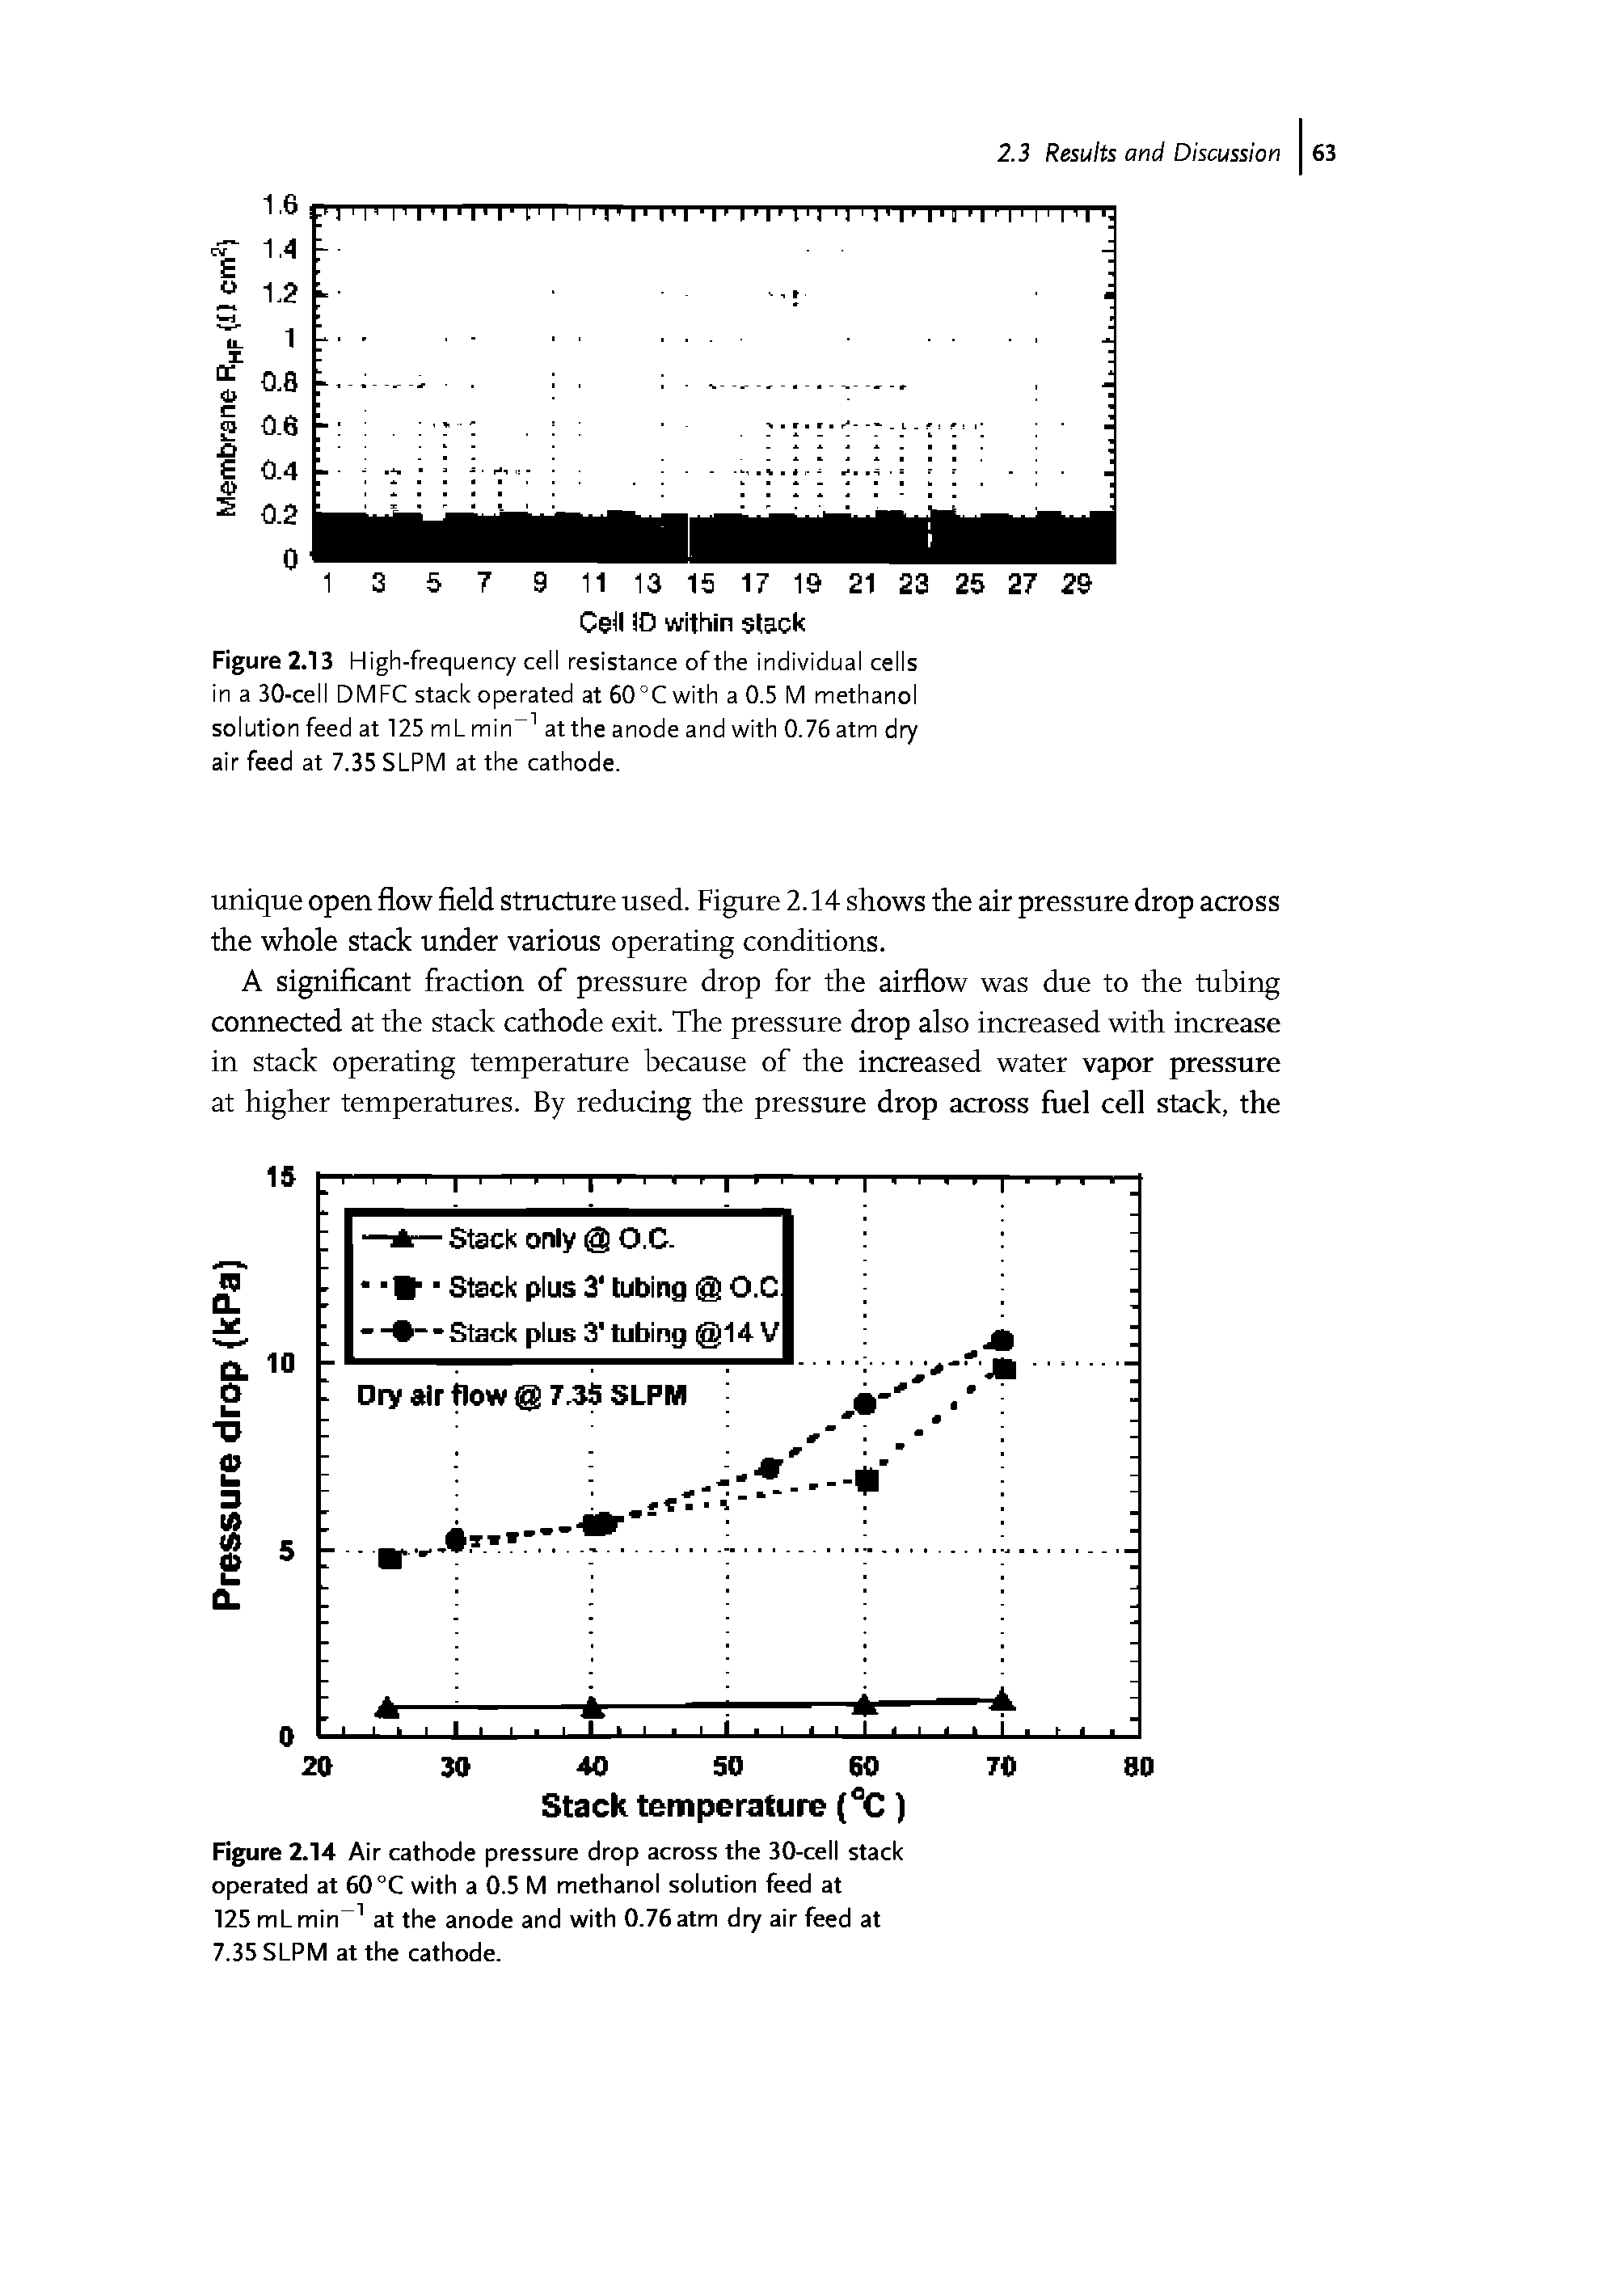 Figure 2.13 High-frequency cell resistance of the individual cells in a 30-cell DMFC stack operated at 60°Cwith a 0.5 M methanol solution feed at 125 ml min at the anode and with 0.76 atm d air feed at 7.35 SLPM at the cathode.